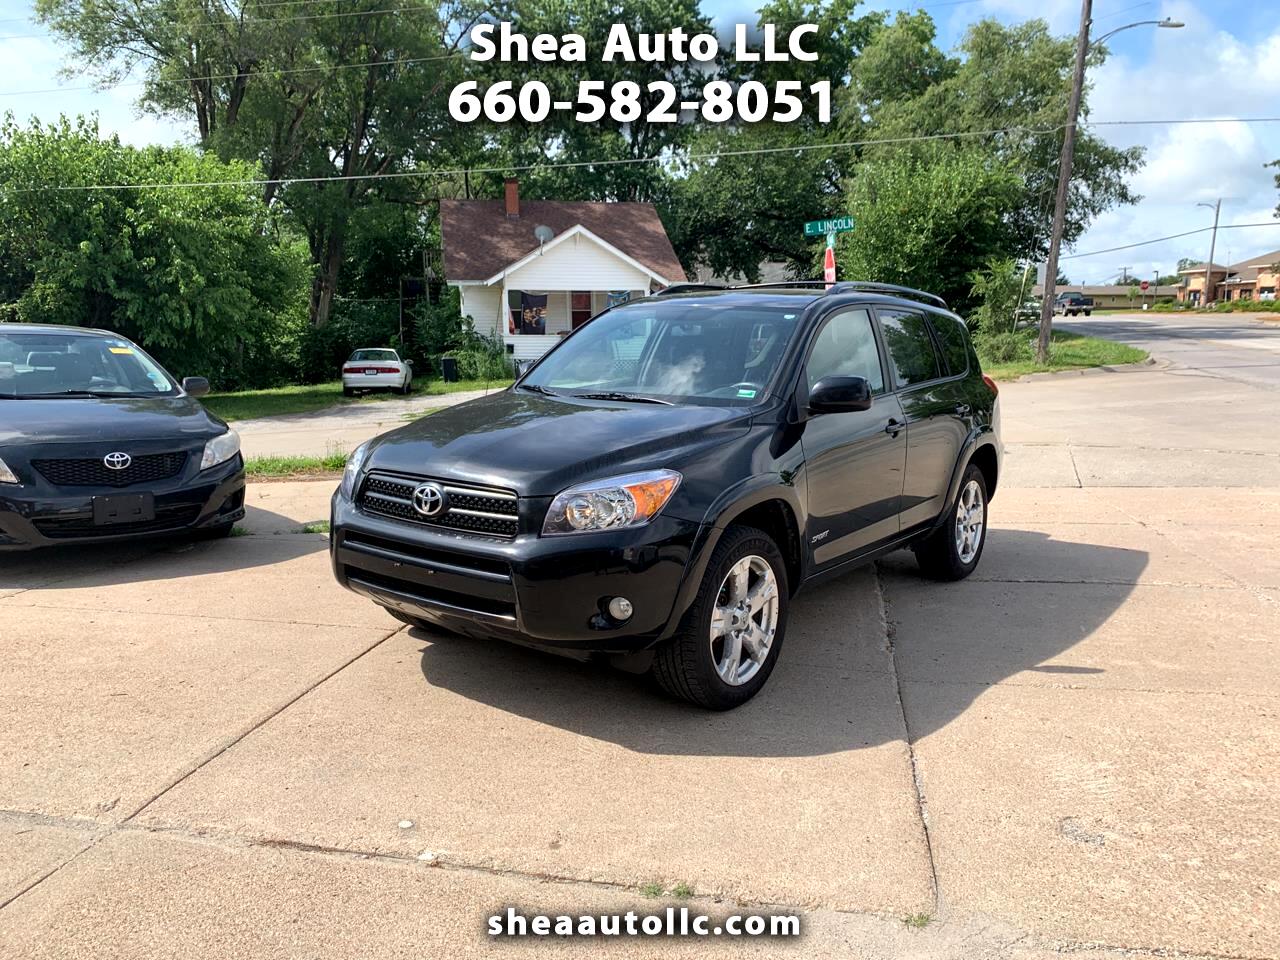 Used 2008 Toyota RAV4 Sport I4 4WD for Sale in Maryville MO 64468 Shea ...